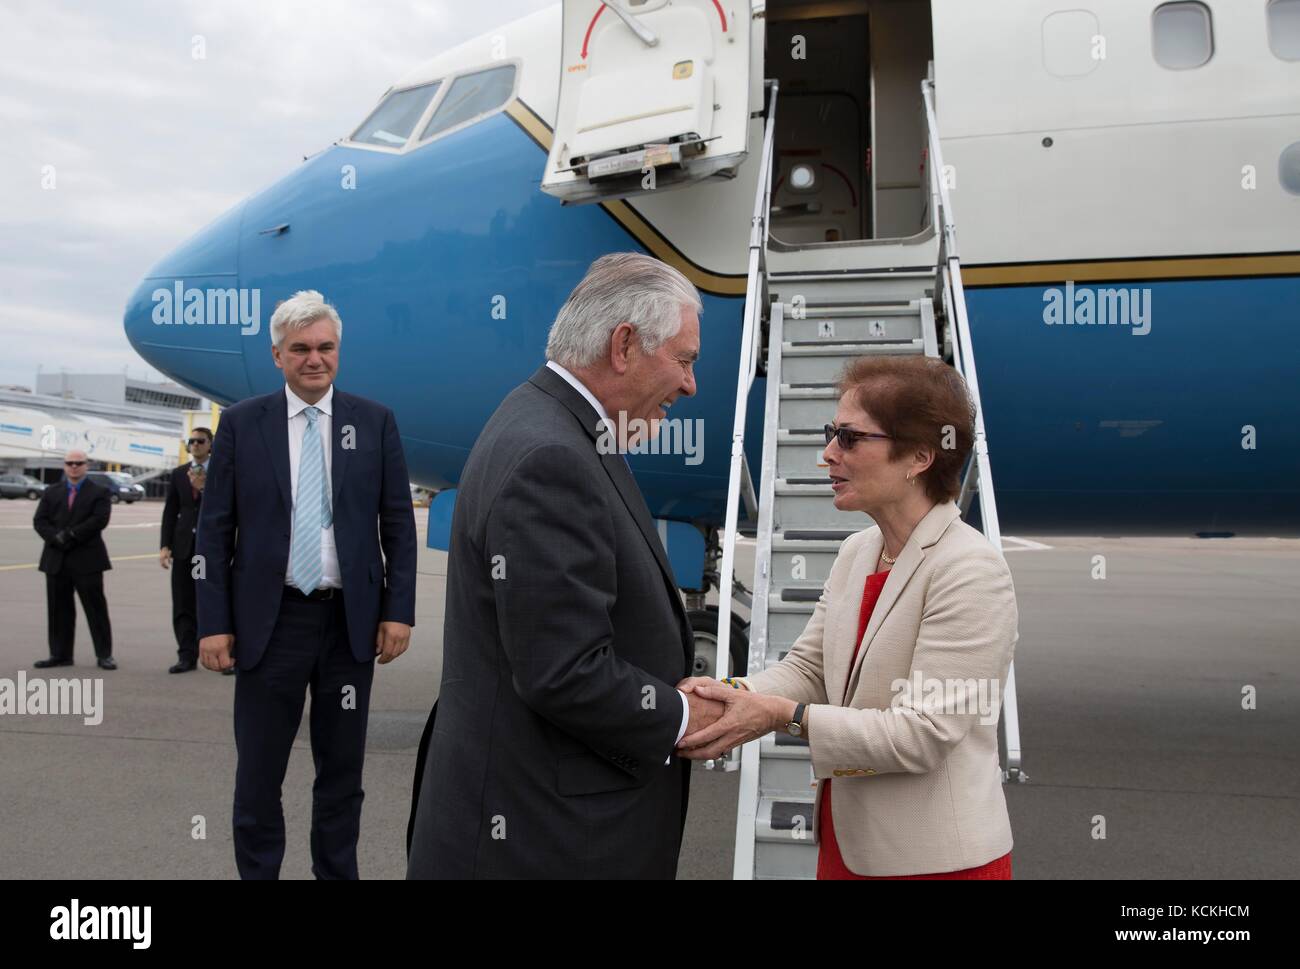 U.S. Secretary of State Rex Tillerson (left) says goodbye to U.S. Ambassador to Ukraine Marie Yovanovitch before departing from the Kyiv Boryspil Airport July 9, 2017 in Kyiv, Ukraine.     (photo by State Department Photo via Planetpix) Stock Photo